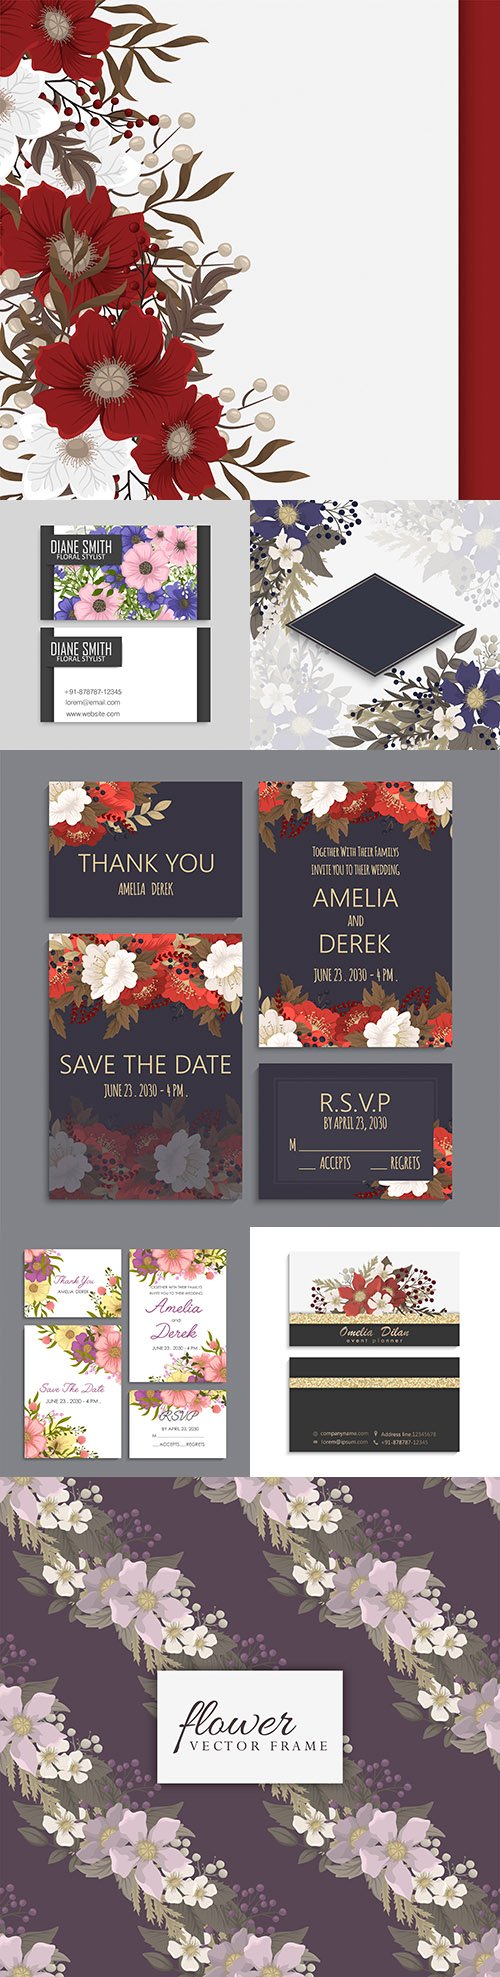 Decorative flower background and business card template